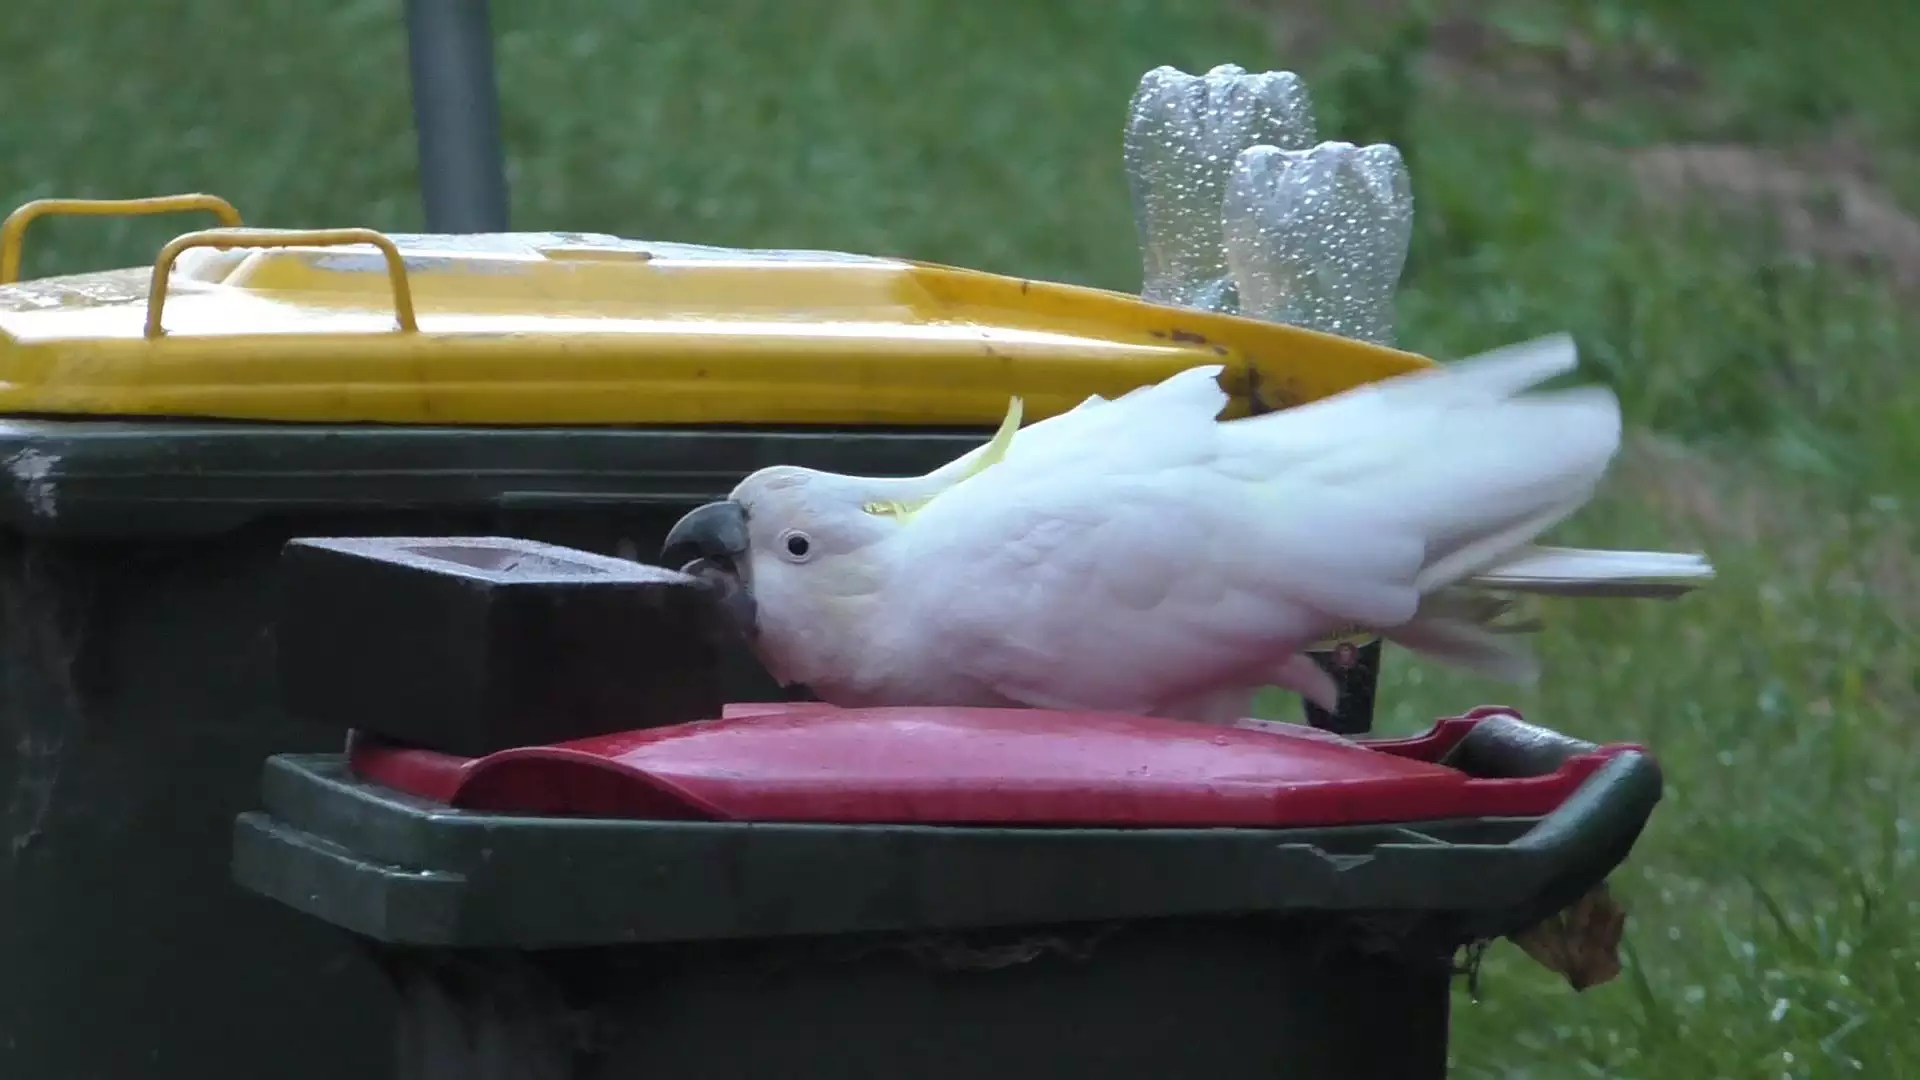 Cockatoos are pillaging trashcans in Australia, and humans can’t seem to stop them